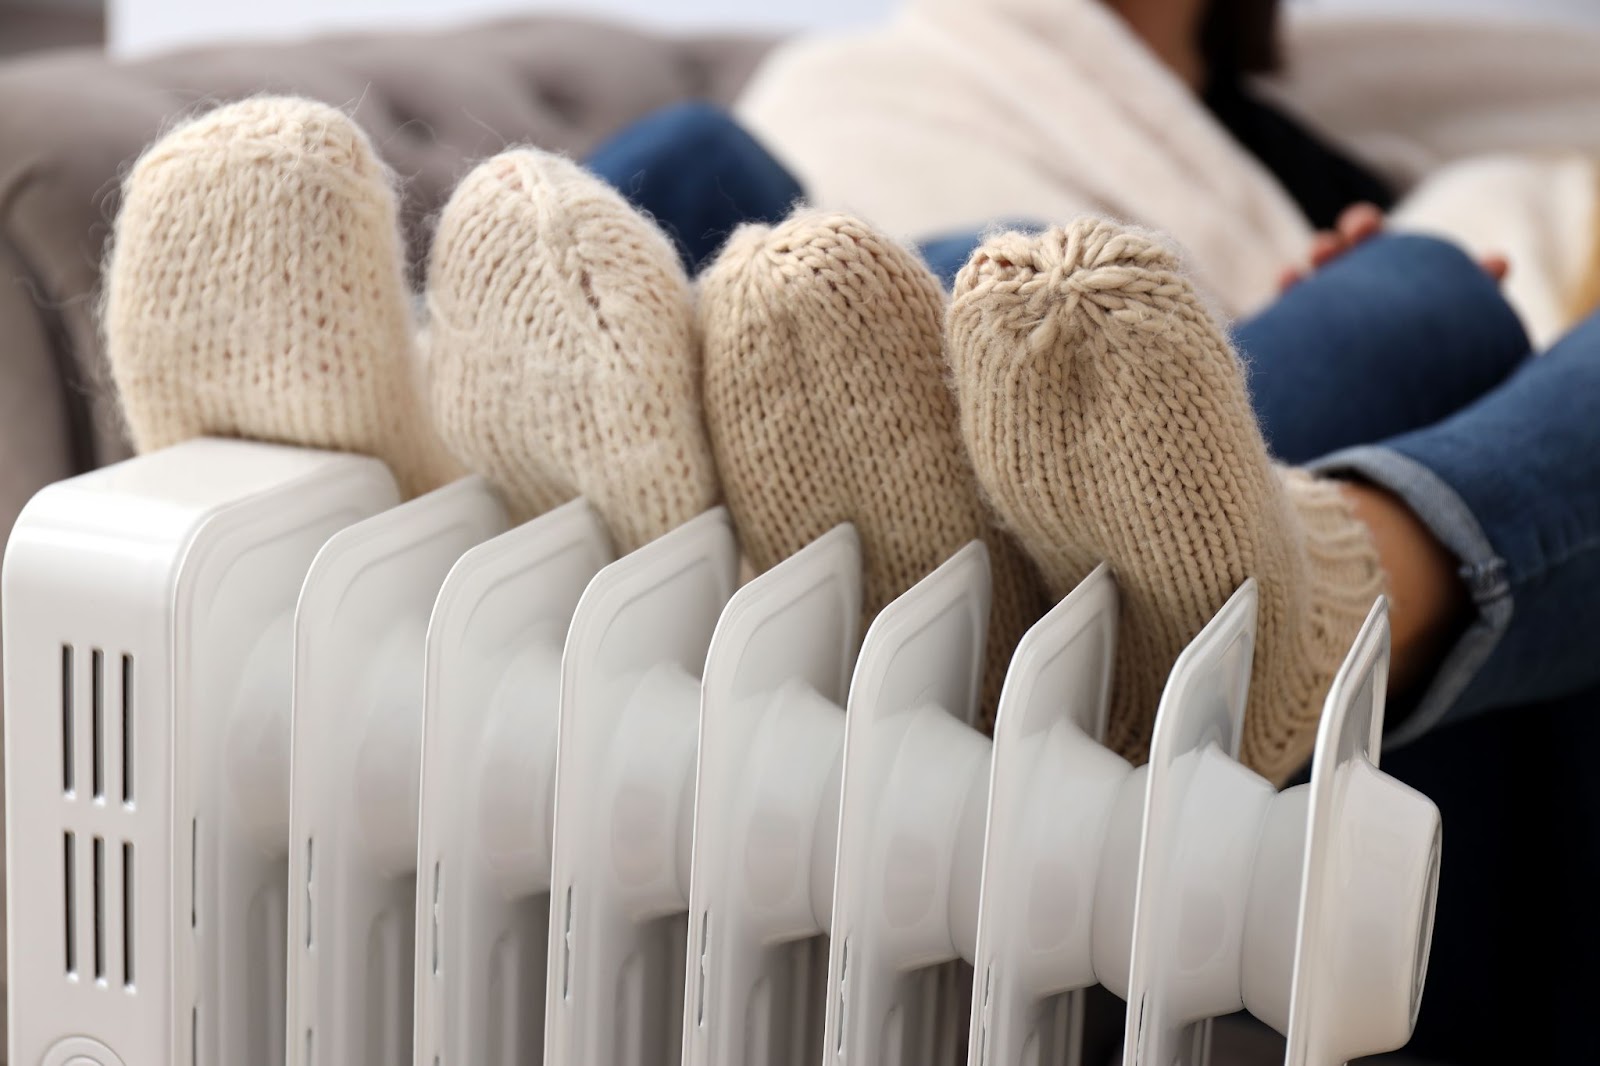 Two pairs of feet warming up on a heater, marking the beginning of the autumn and winter heating season